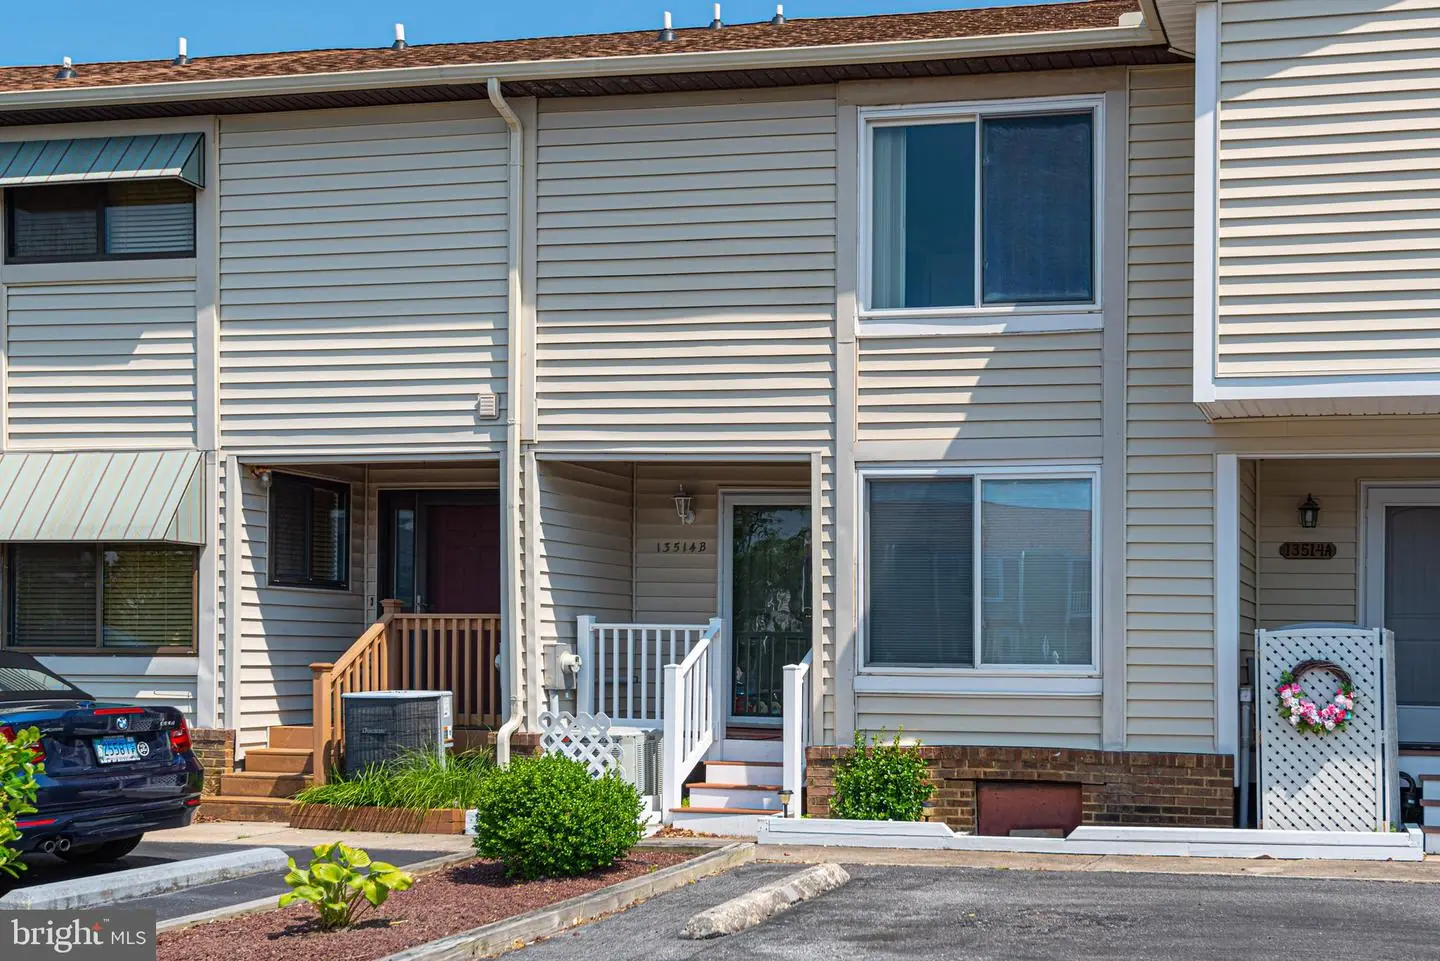 MDWO115456-304221080546-2021-07-17-02-56-54 13514-b Holly Ln #4a | Ocean City, MD Real Estate For Sale | MLS# Mdwo115456  - 1st Choice Properties